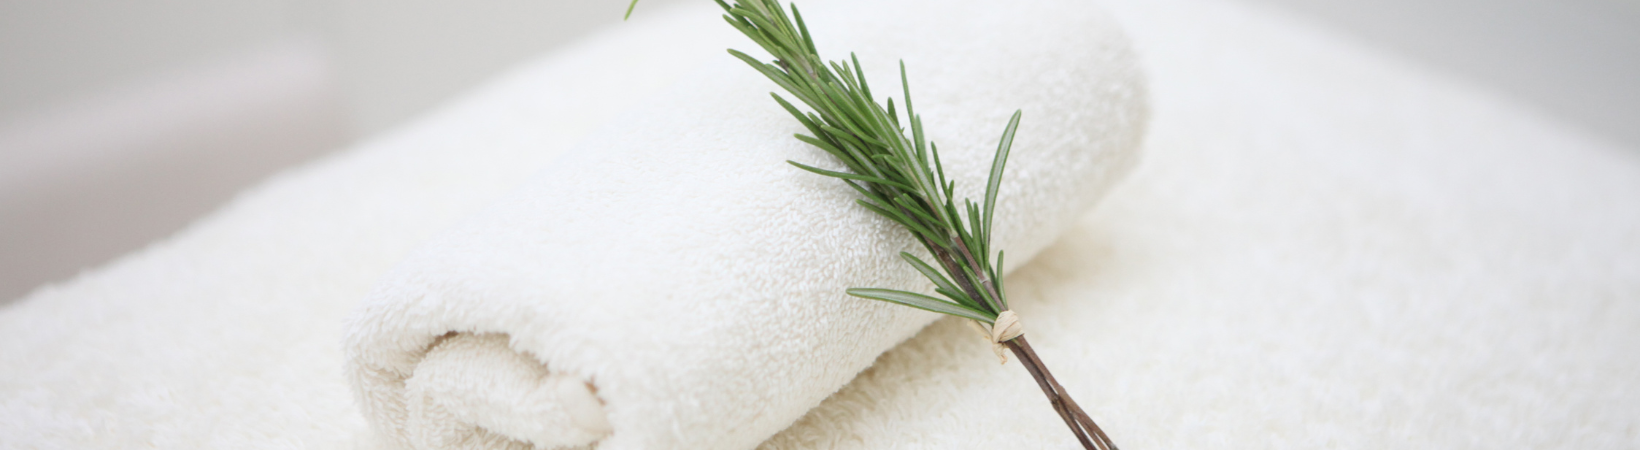 Rolled white towel with sprig of Rosemary - Home beauty salon decor aesthetic interior neutrals inspo